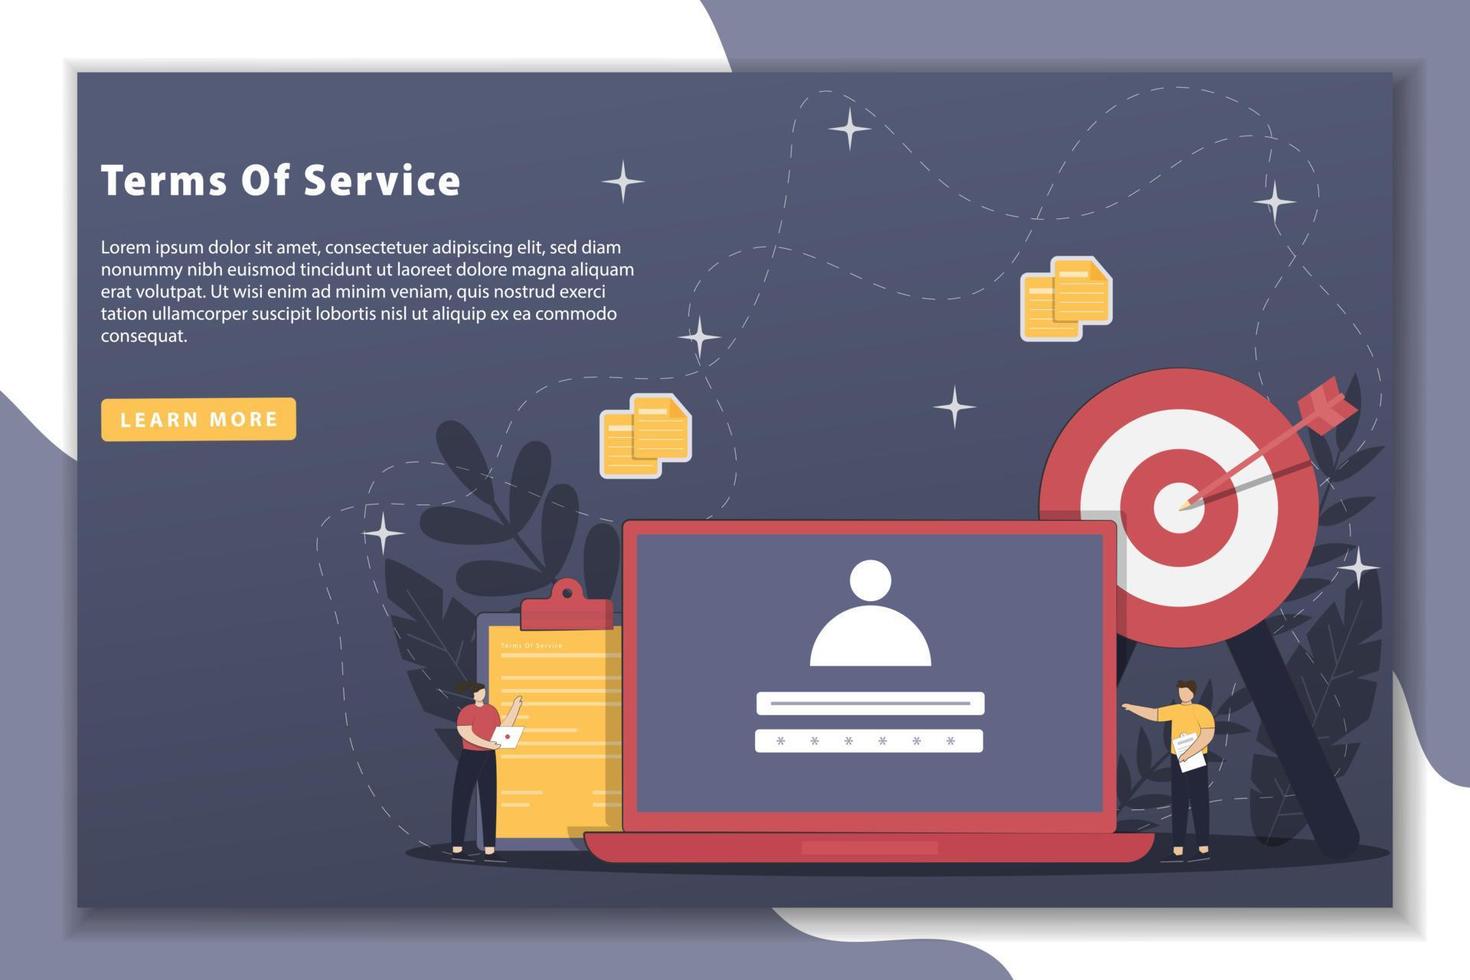 Terms of service concept with landing page vector